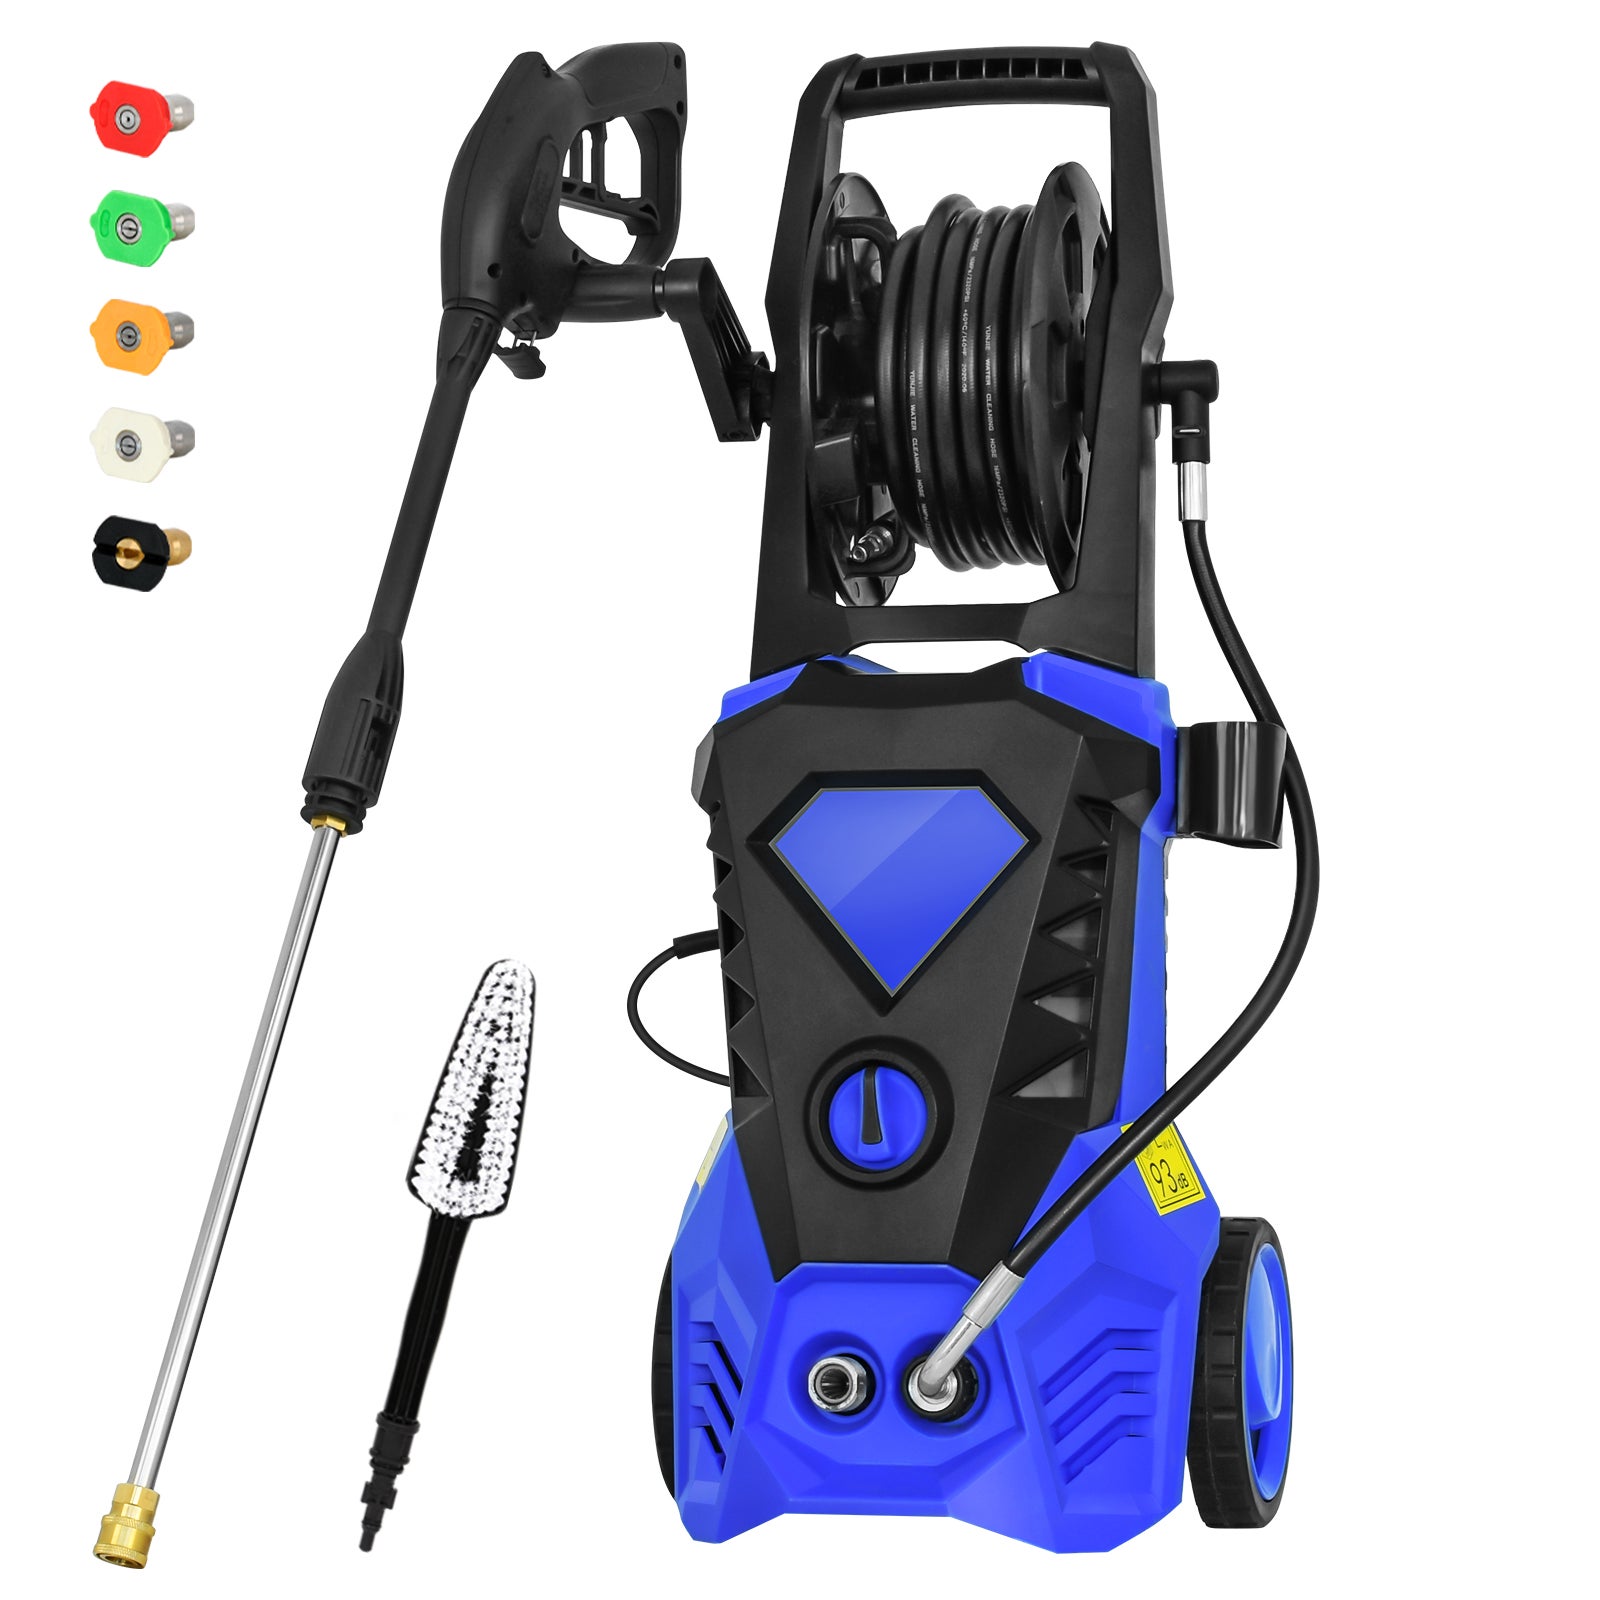 Advwin 3900PSI High Pressure Washer Cleaner Electric Pressure Washer with 5 Nozzle Foam Cannon for Homes Cars Driveways Patios Blue